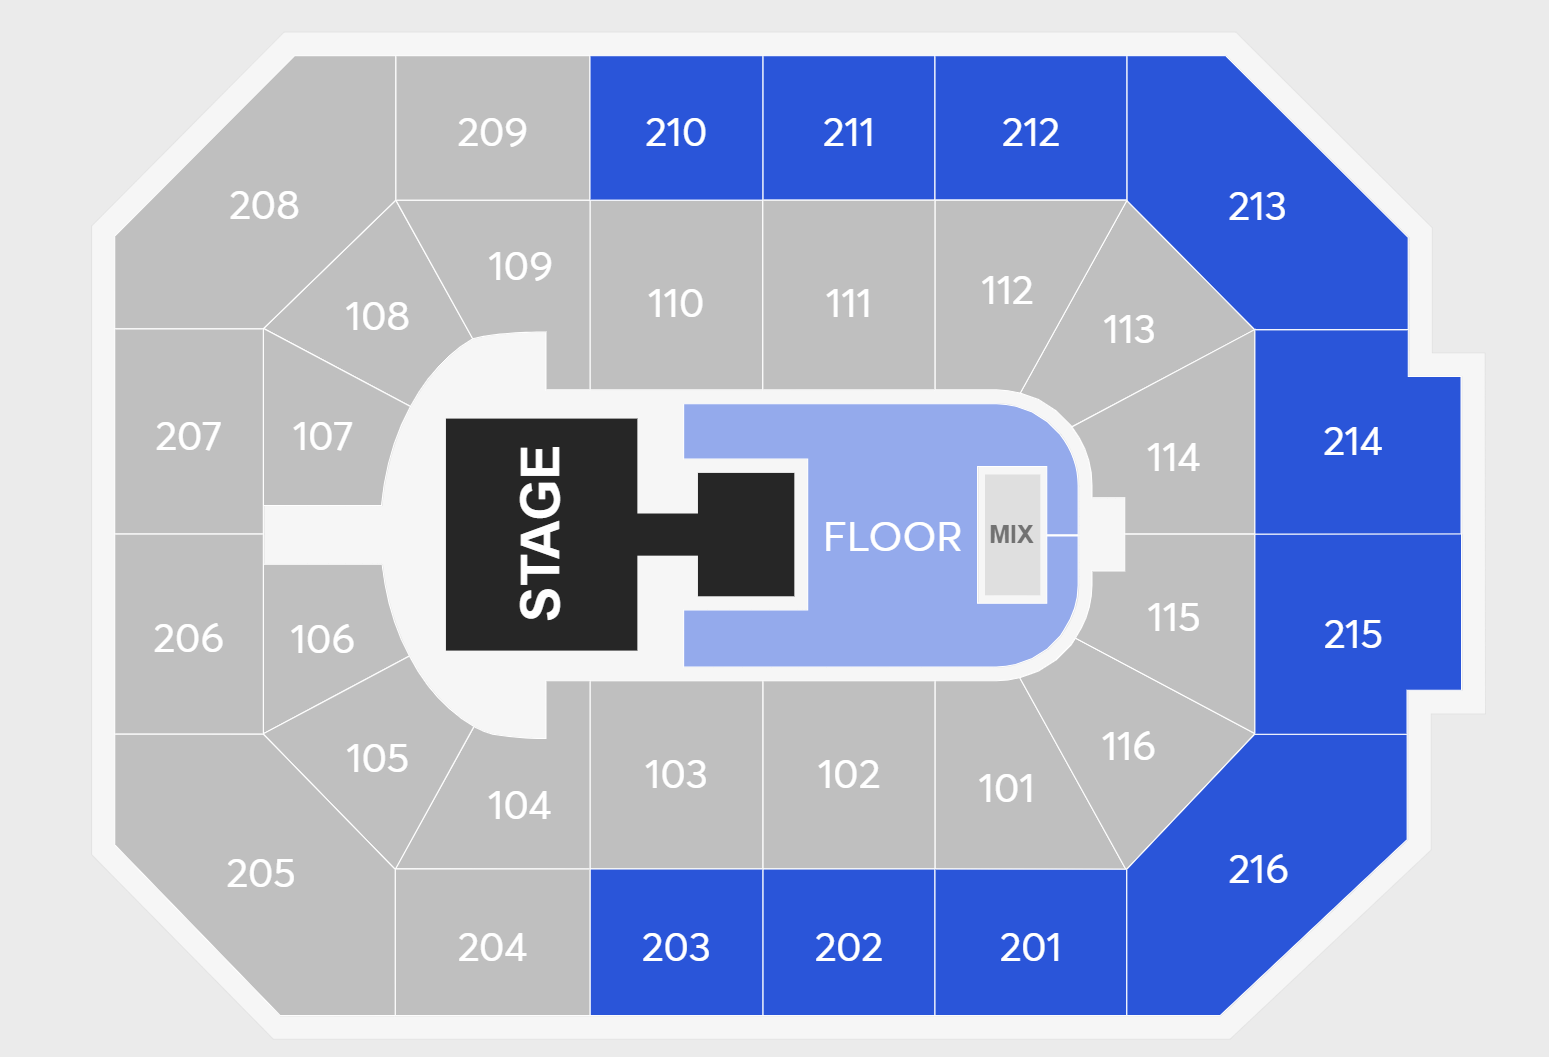 Fans need a presale code to unlock floor seating but there are Official Platinum tickets available in the upper bowl